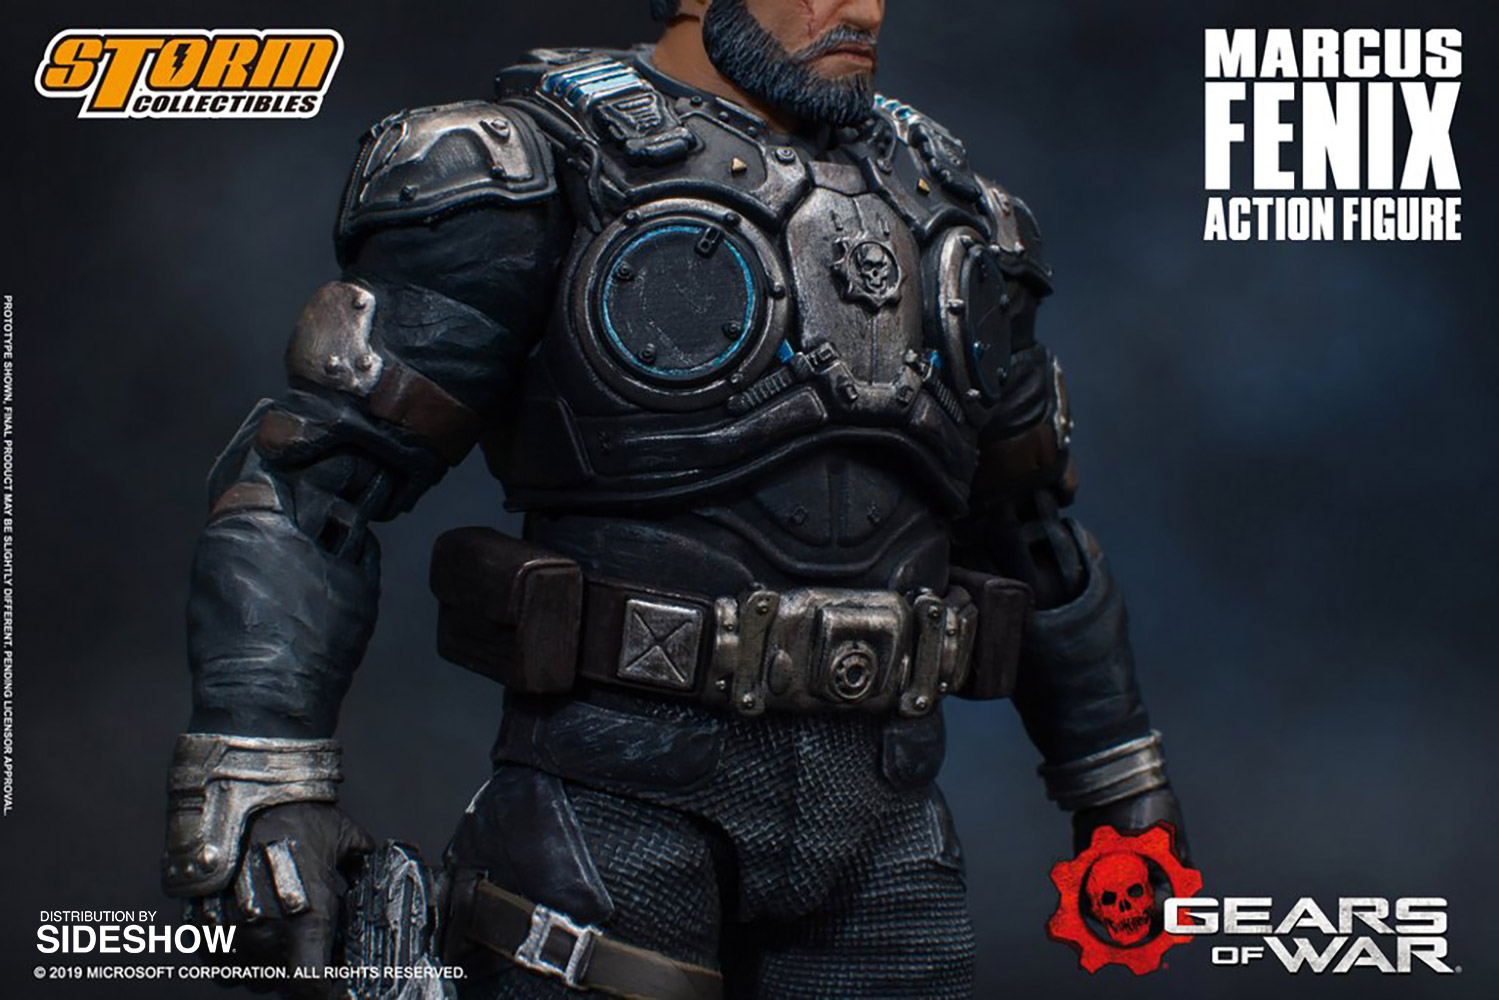 The Marcus Fenix 1 12 Action Figure Sideshow Collectibles